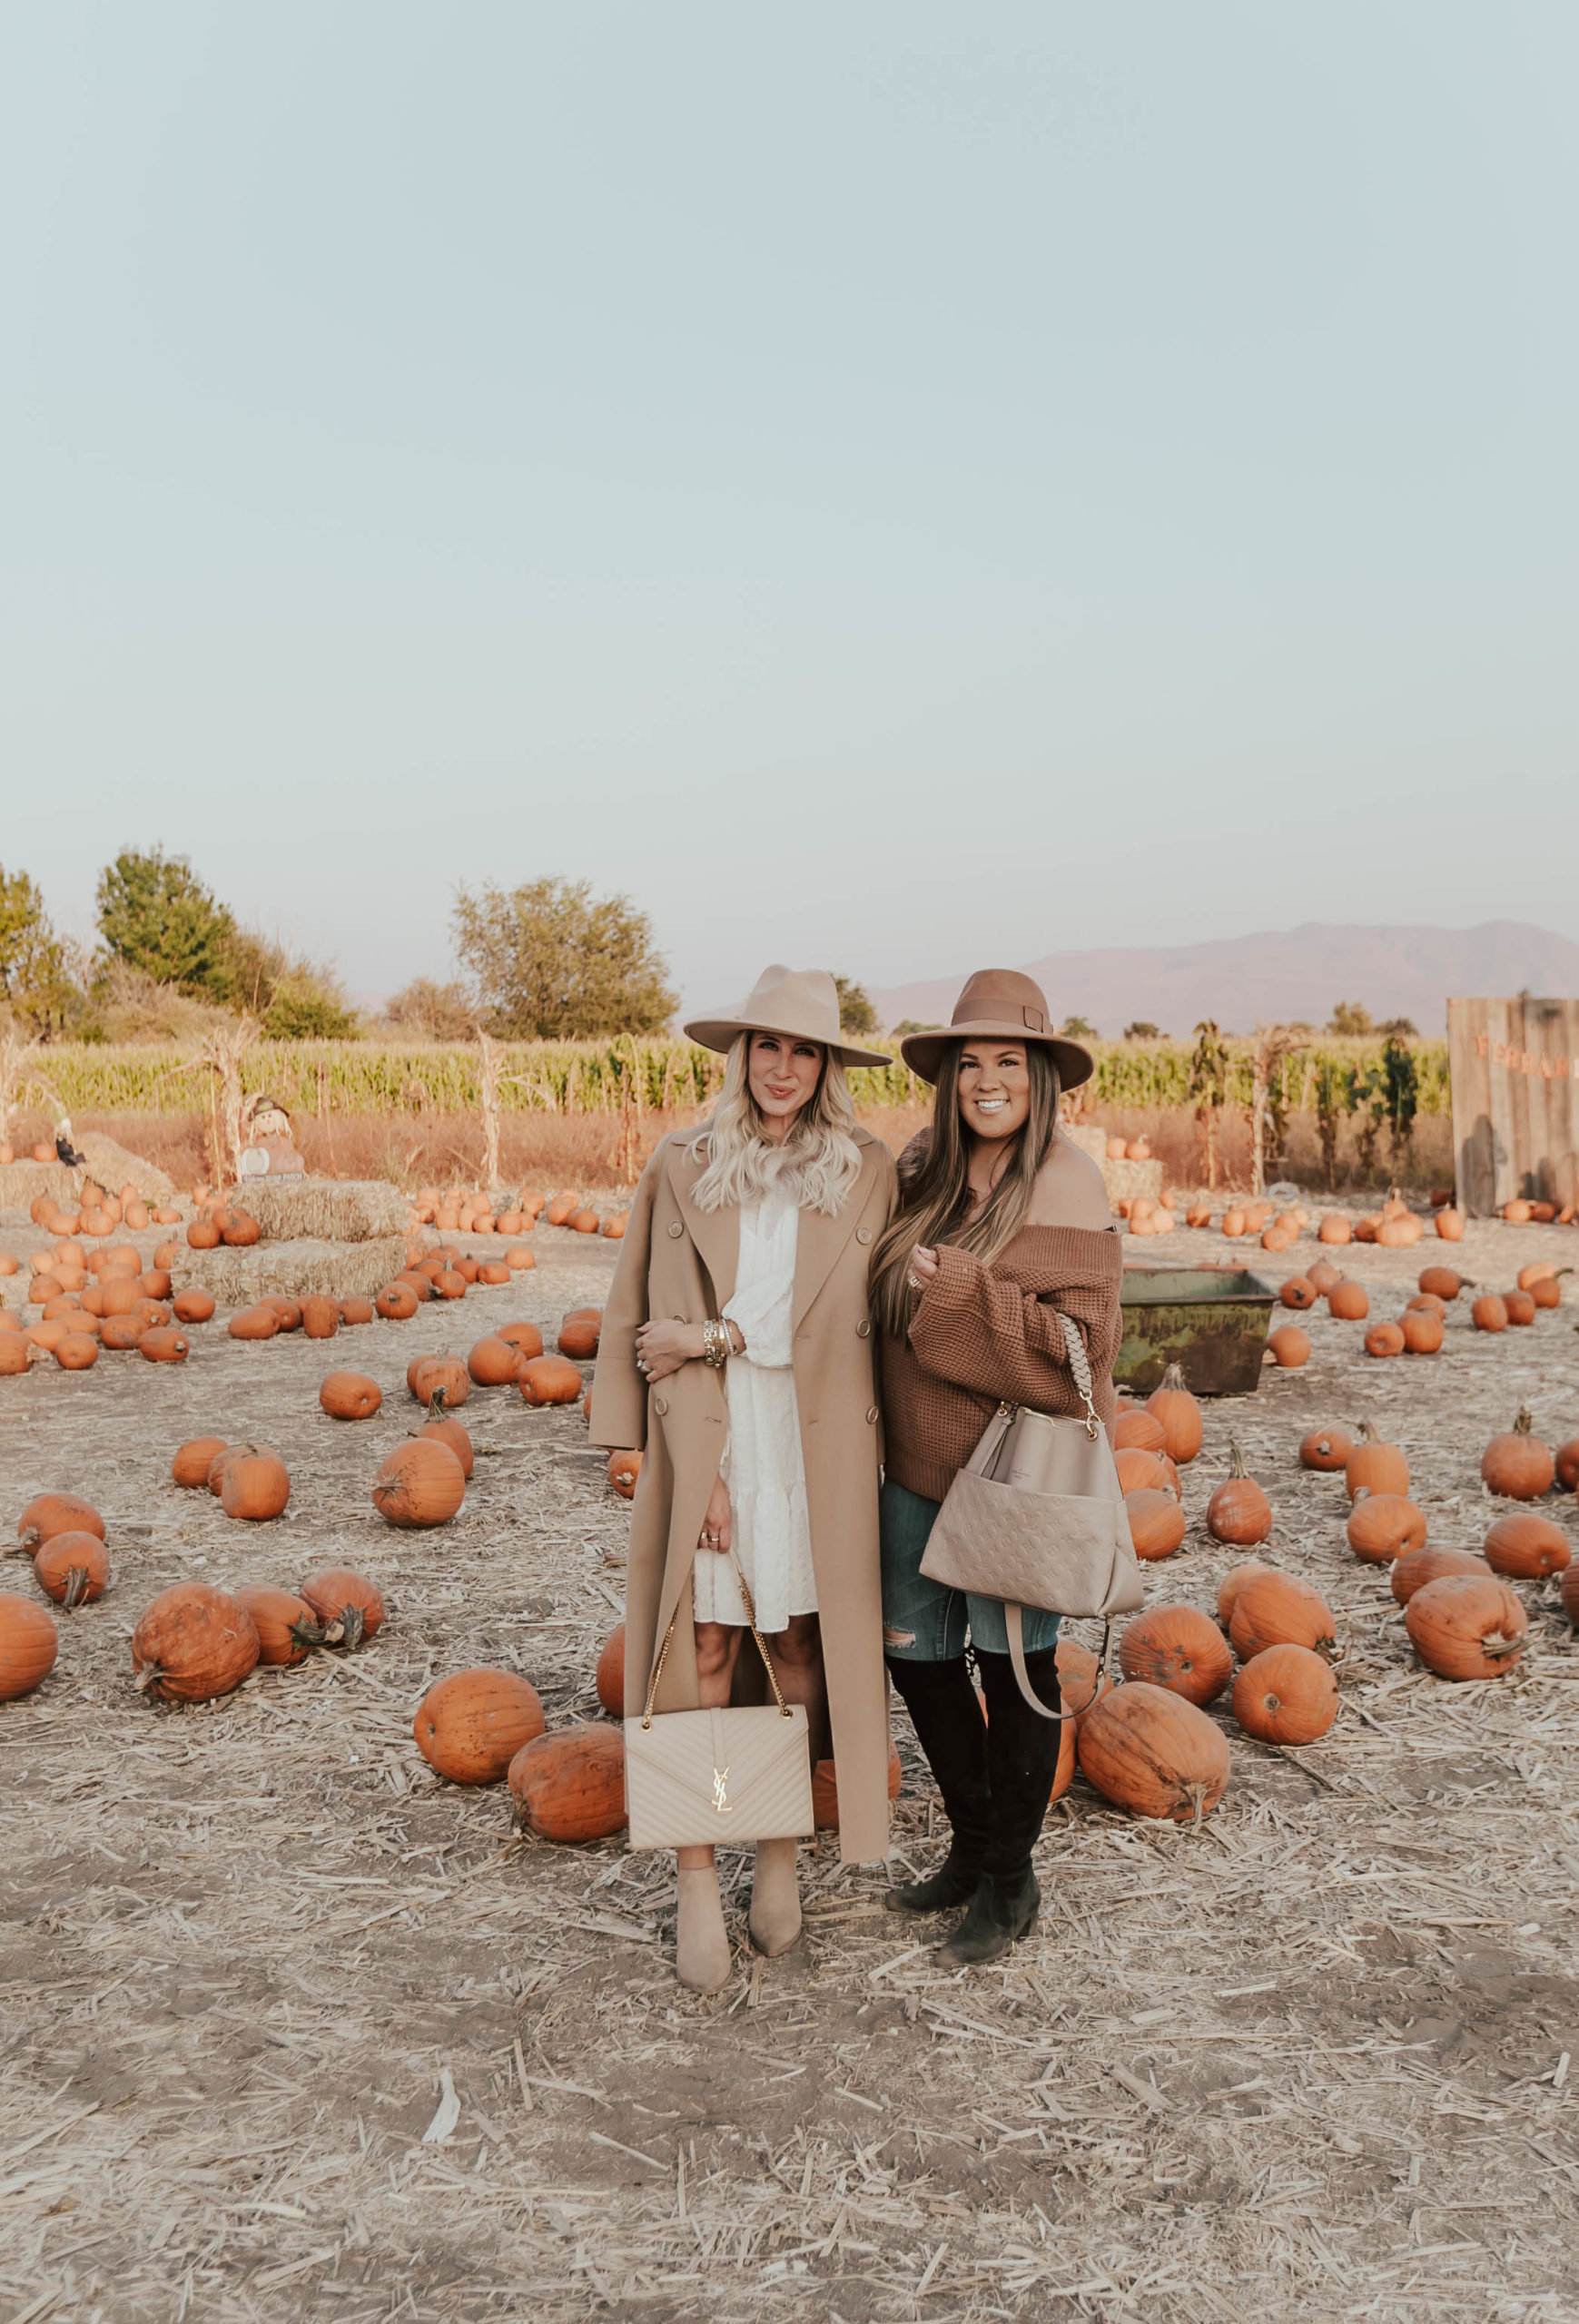 Reno bloggers Ashley Zeal Hurd and Emily Wieczorek share Ten Fall Things to Do in Reno - the best fall bucket list!